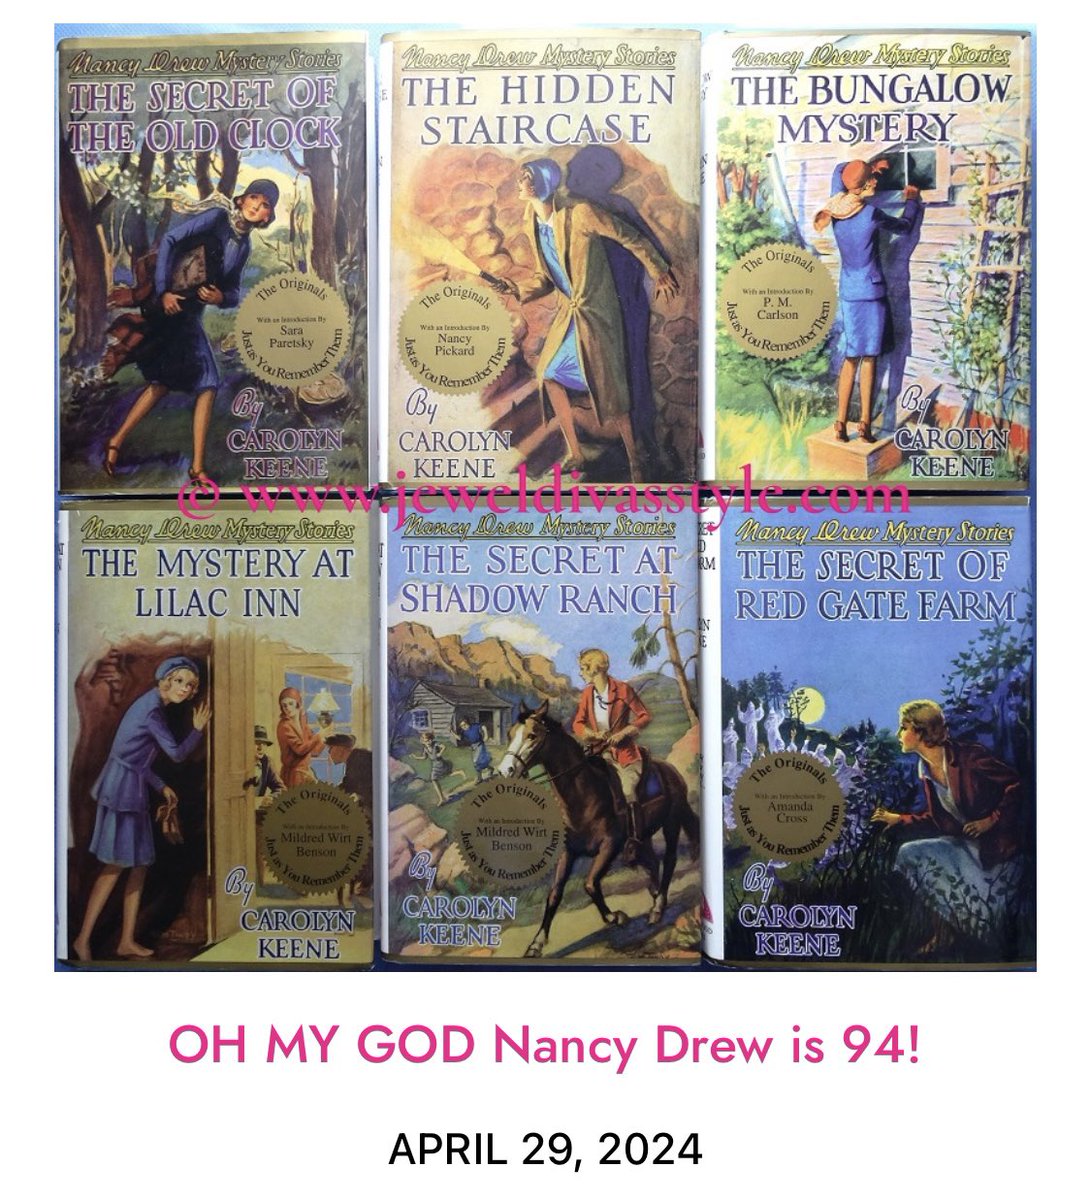 BLOG POST: This week we’re celebrating the 94th birthday of Nancy Drew with the goodies I’ve bought in the last year. Link is in the bio.
.
#jeweldivasstyle #lifestyleblogger #nancydrew #collectibles #books #bookcollection